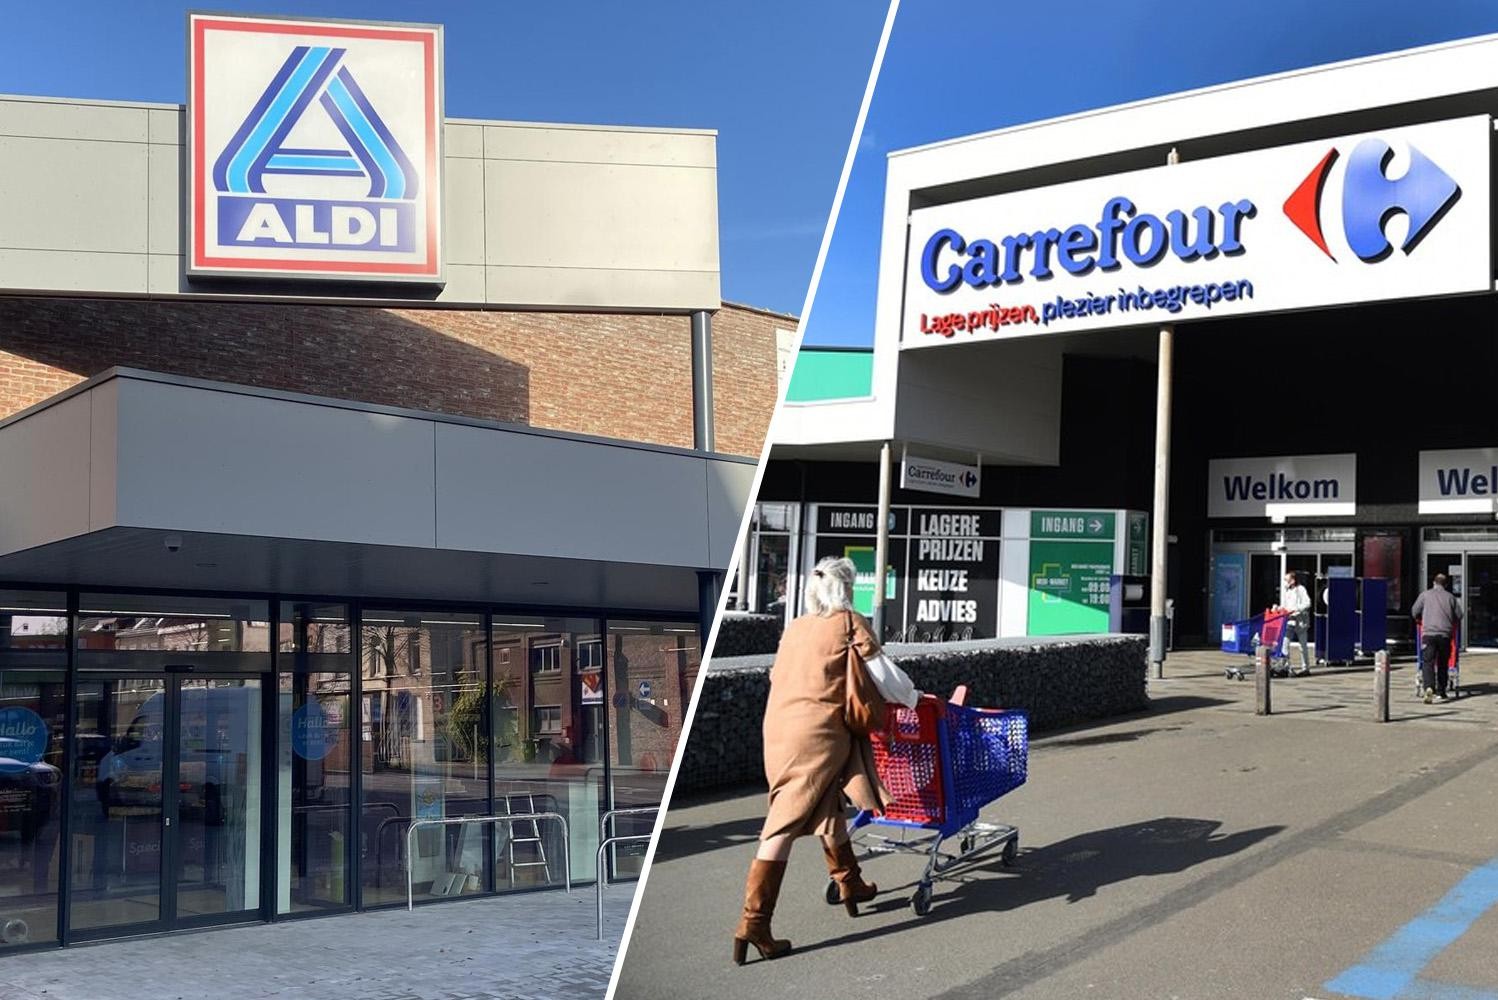 Aldi and Carrefour also put restrictions on quantities that customers can purchase